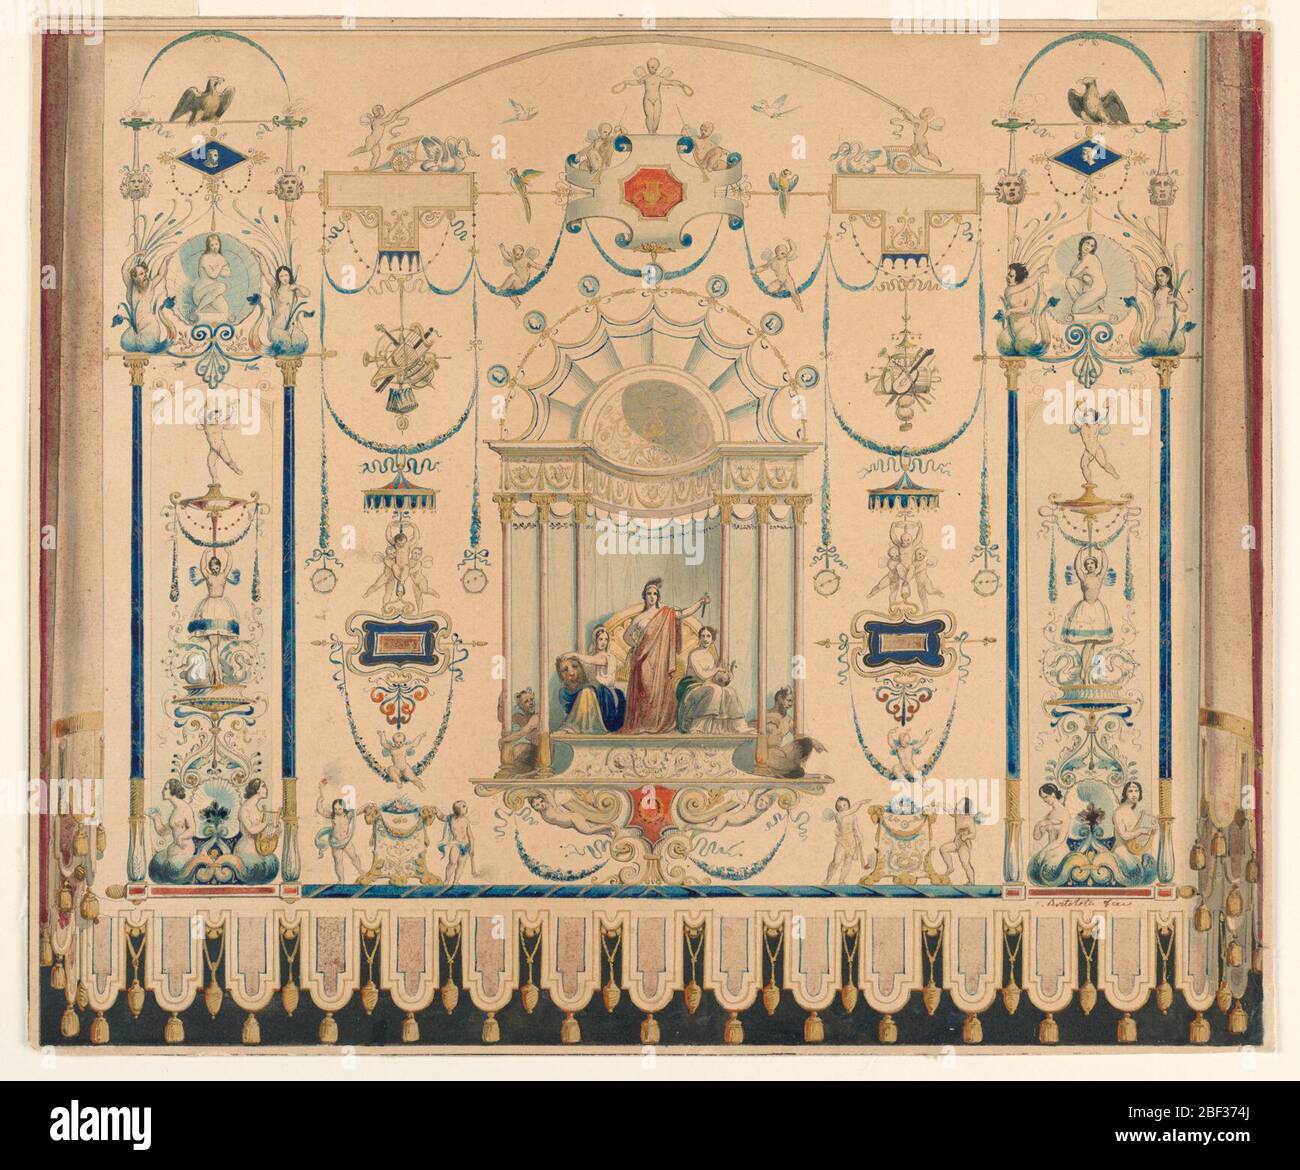 Design for a Theater Curtain. Horizontal format. Designs in the grotesque style. An exedra forms the central motif in which a woman with a dagger, probably 'Tragedy,' stands between two seated women; the left one holds a bloody bearded head, the right one plays a lyre. Stock Photo